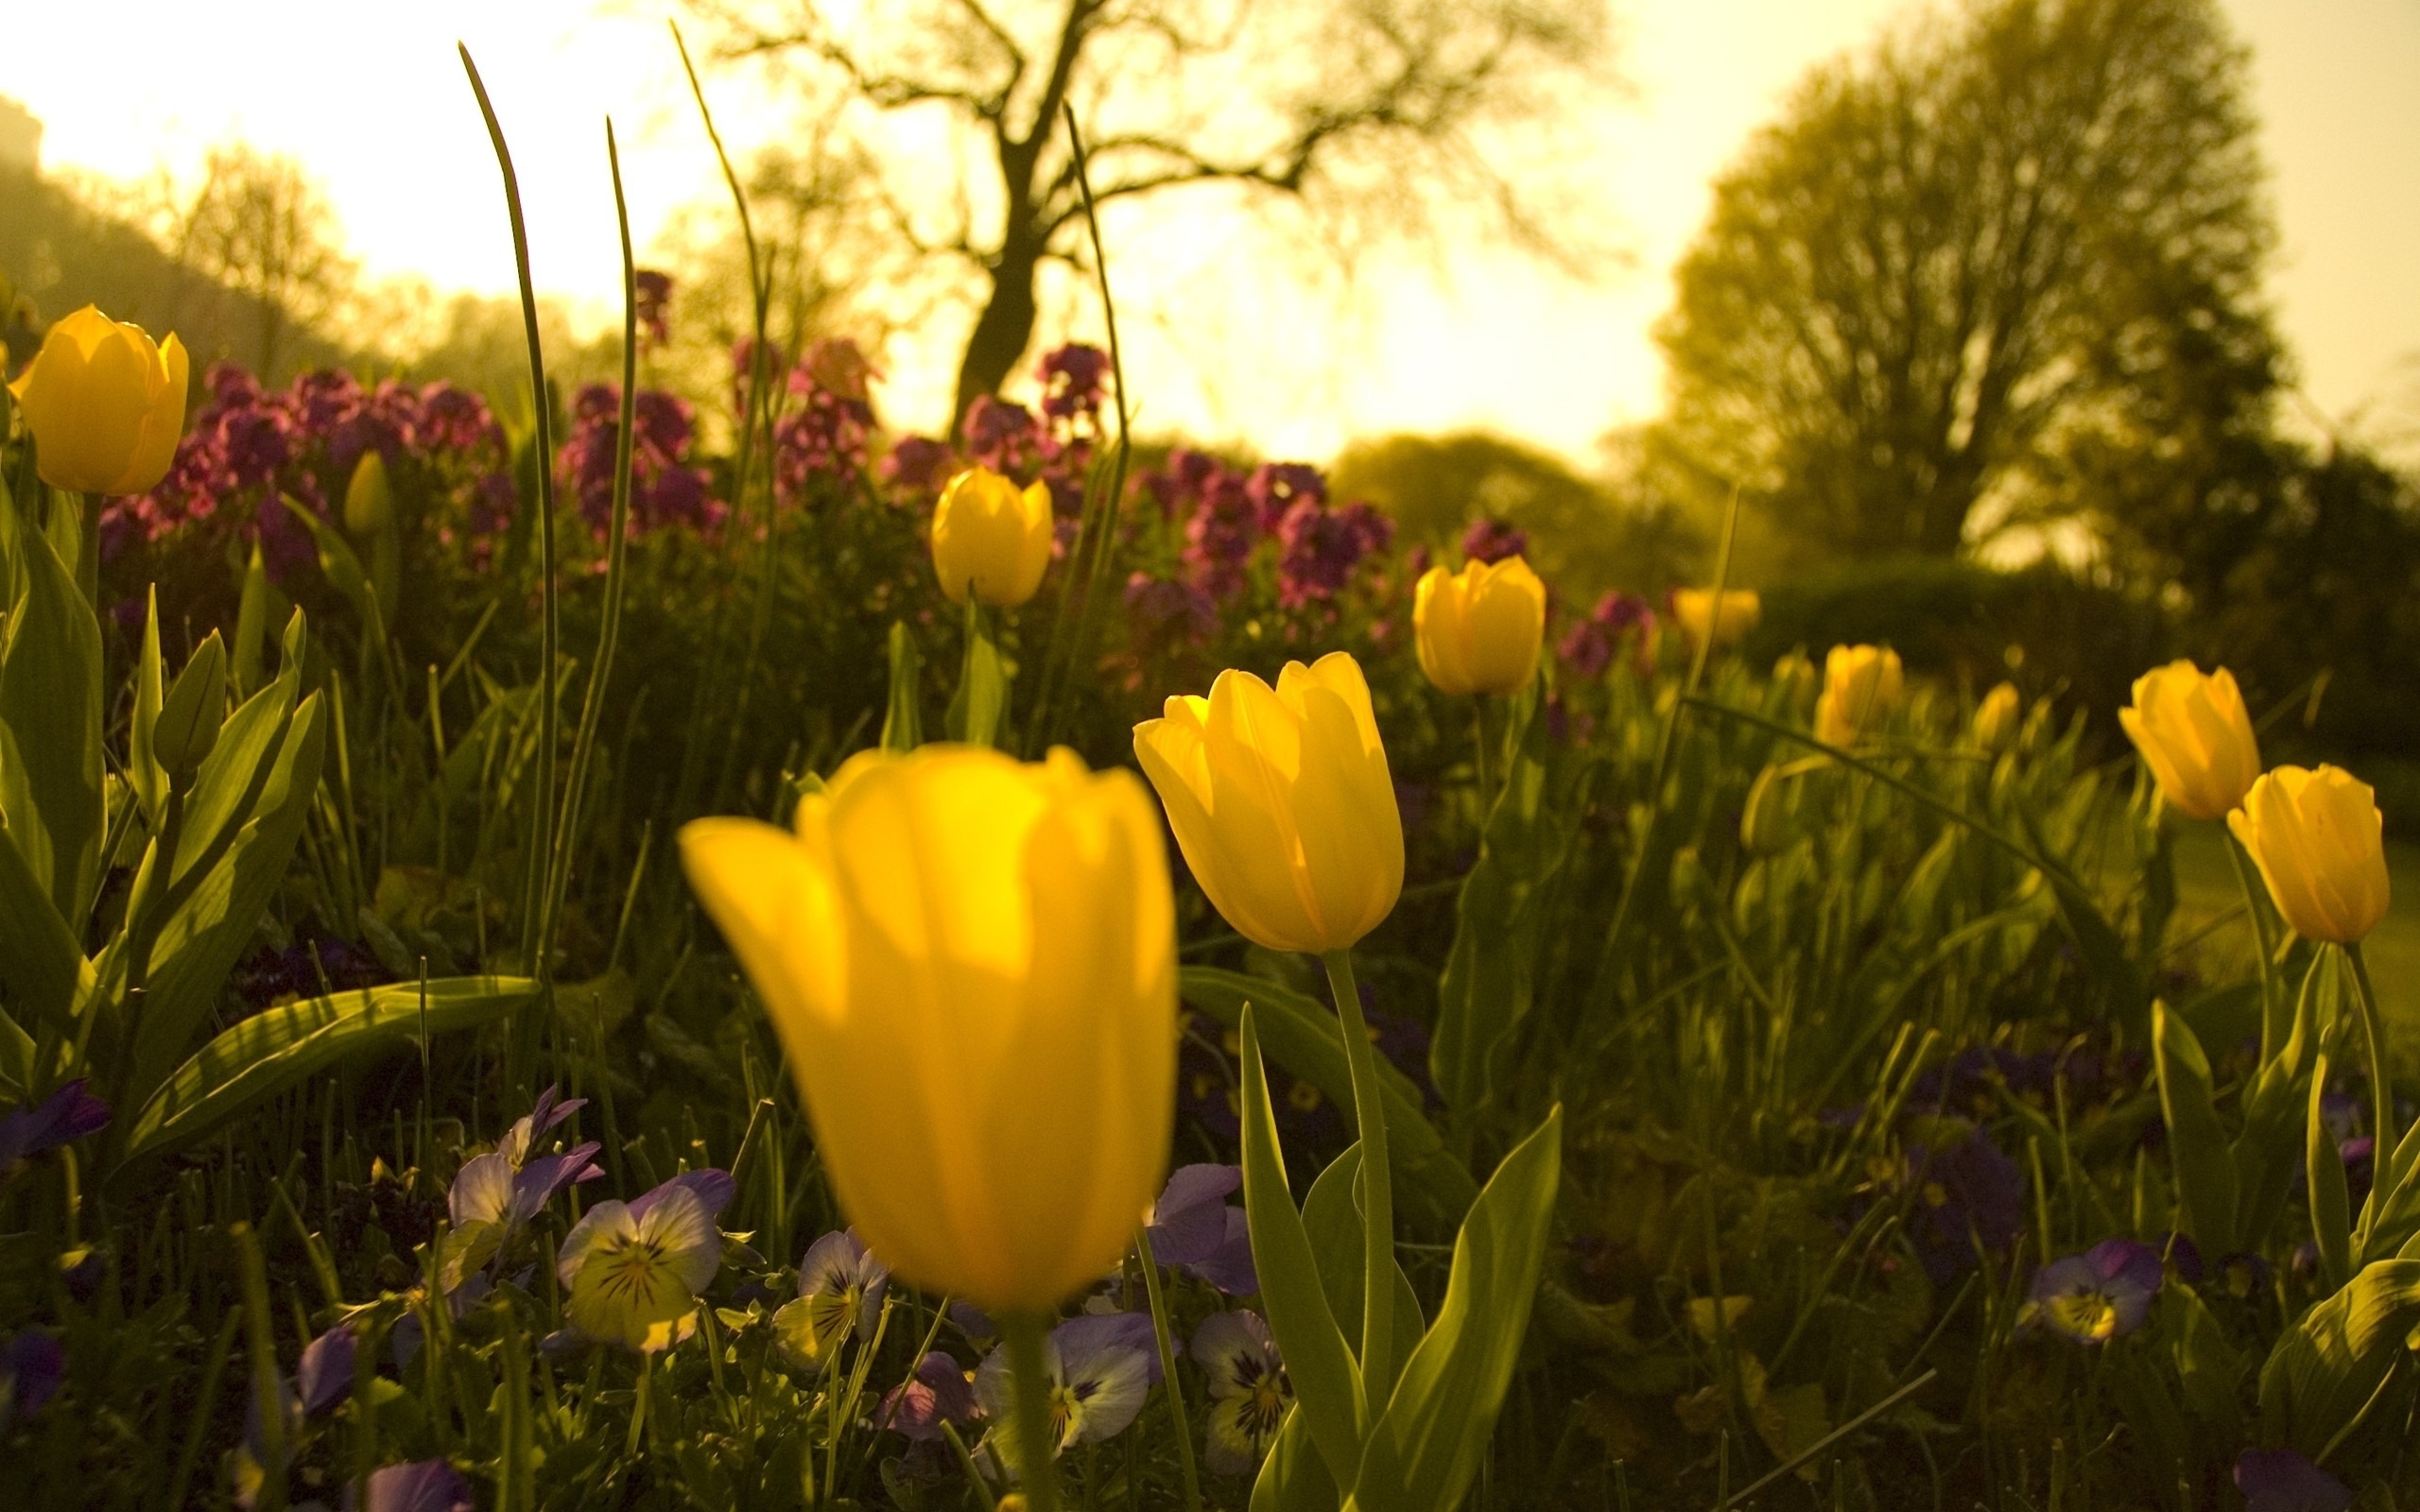 Wallpapers yellow tulips sunrise flowerbed on the desktop